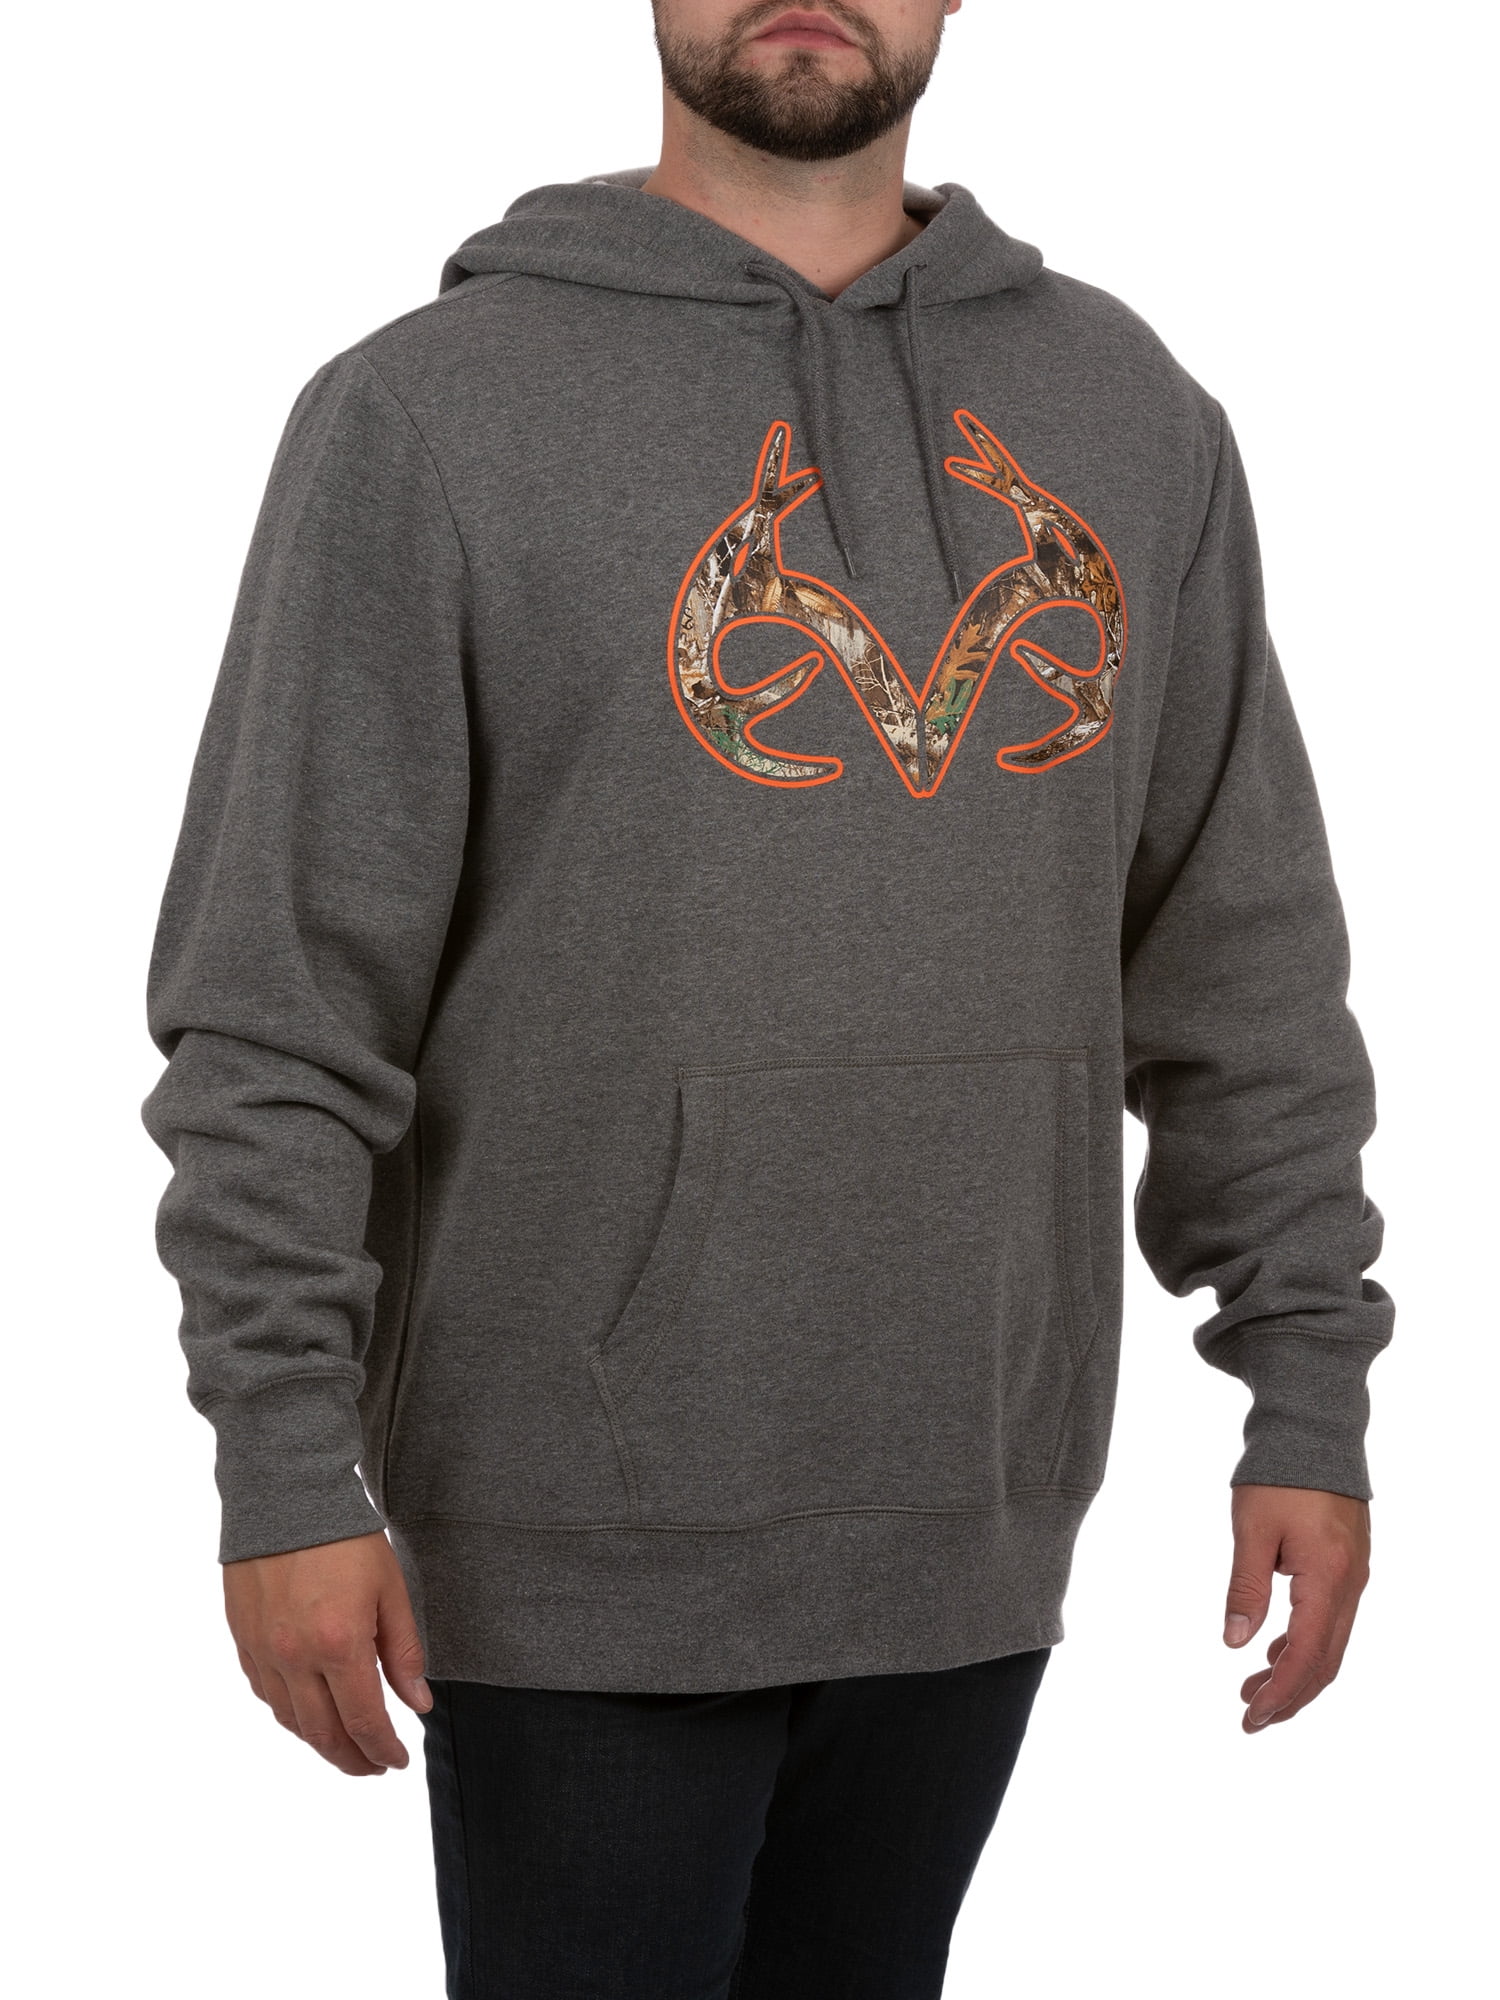 Realtree Men’s Graphic Hoodie with Long Sleeves